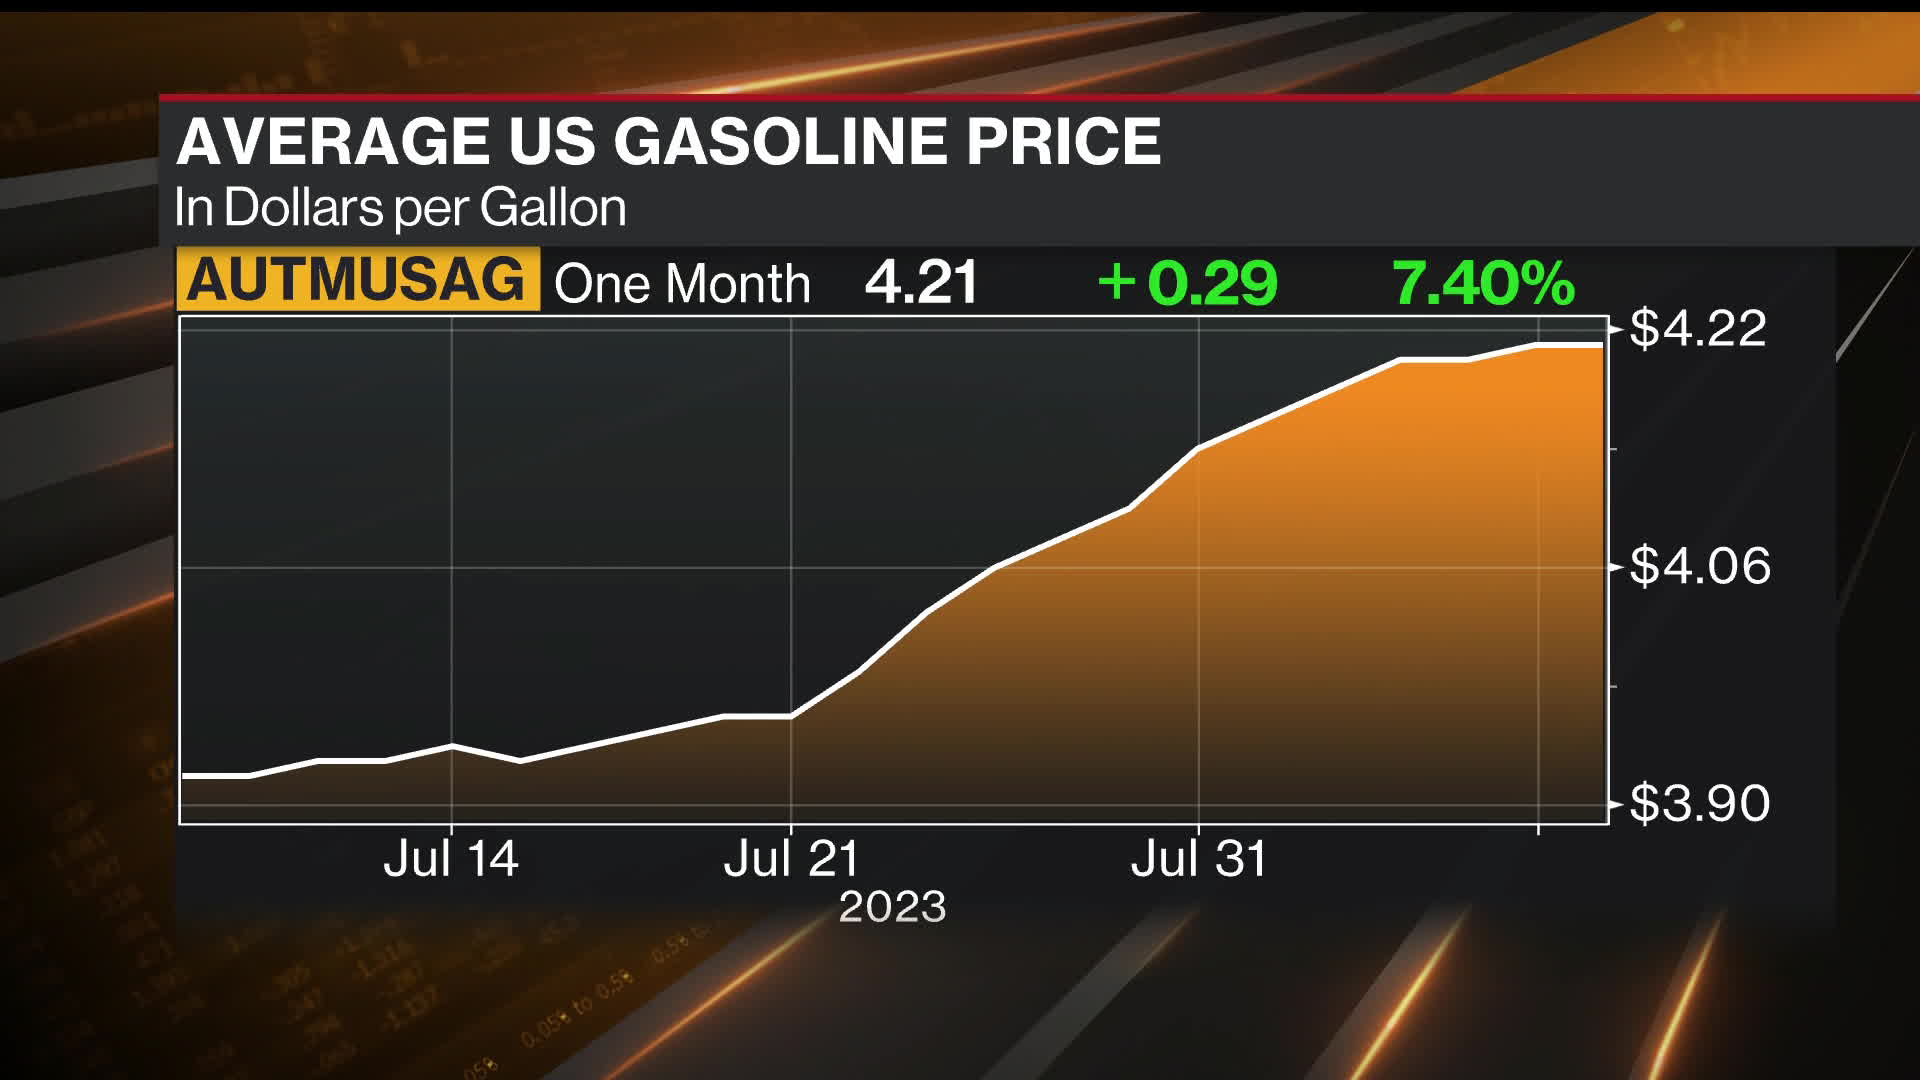 Diesel Price Increase in July Add to Energy Inflation, Outstrips Gasoline's  Rise - Bloomberg